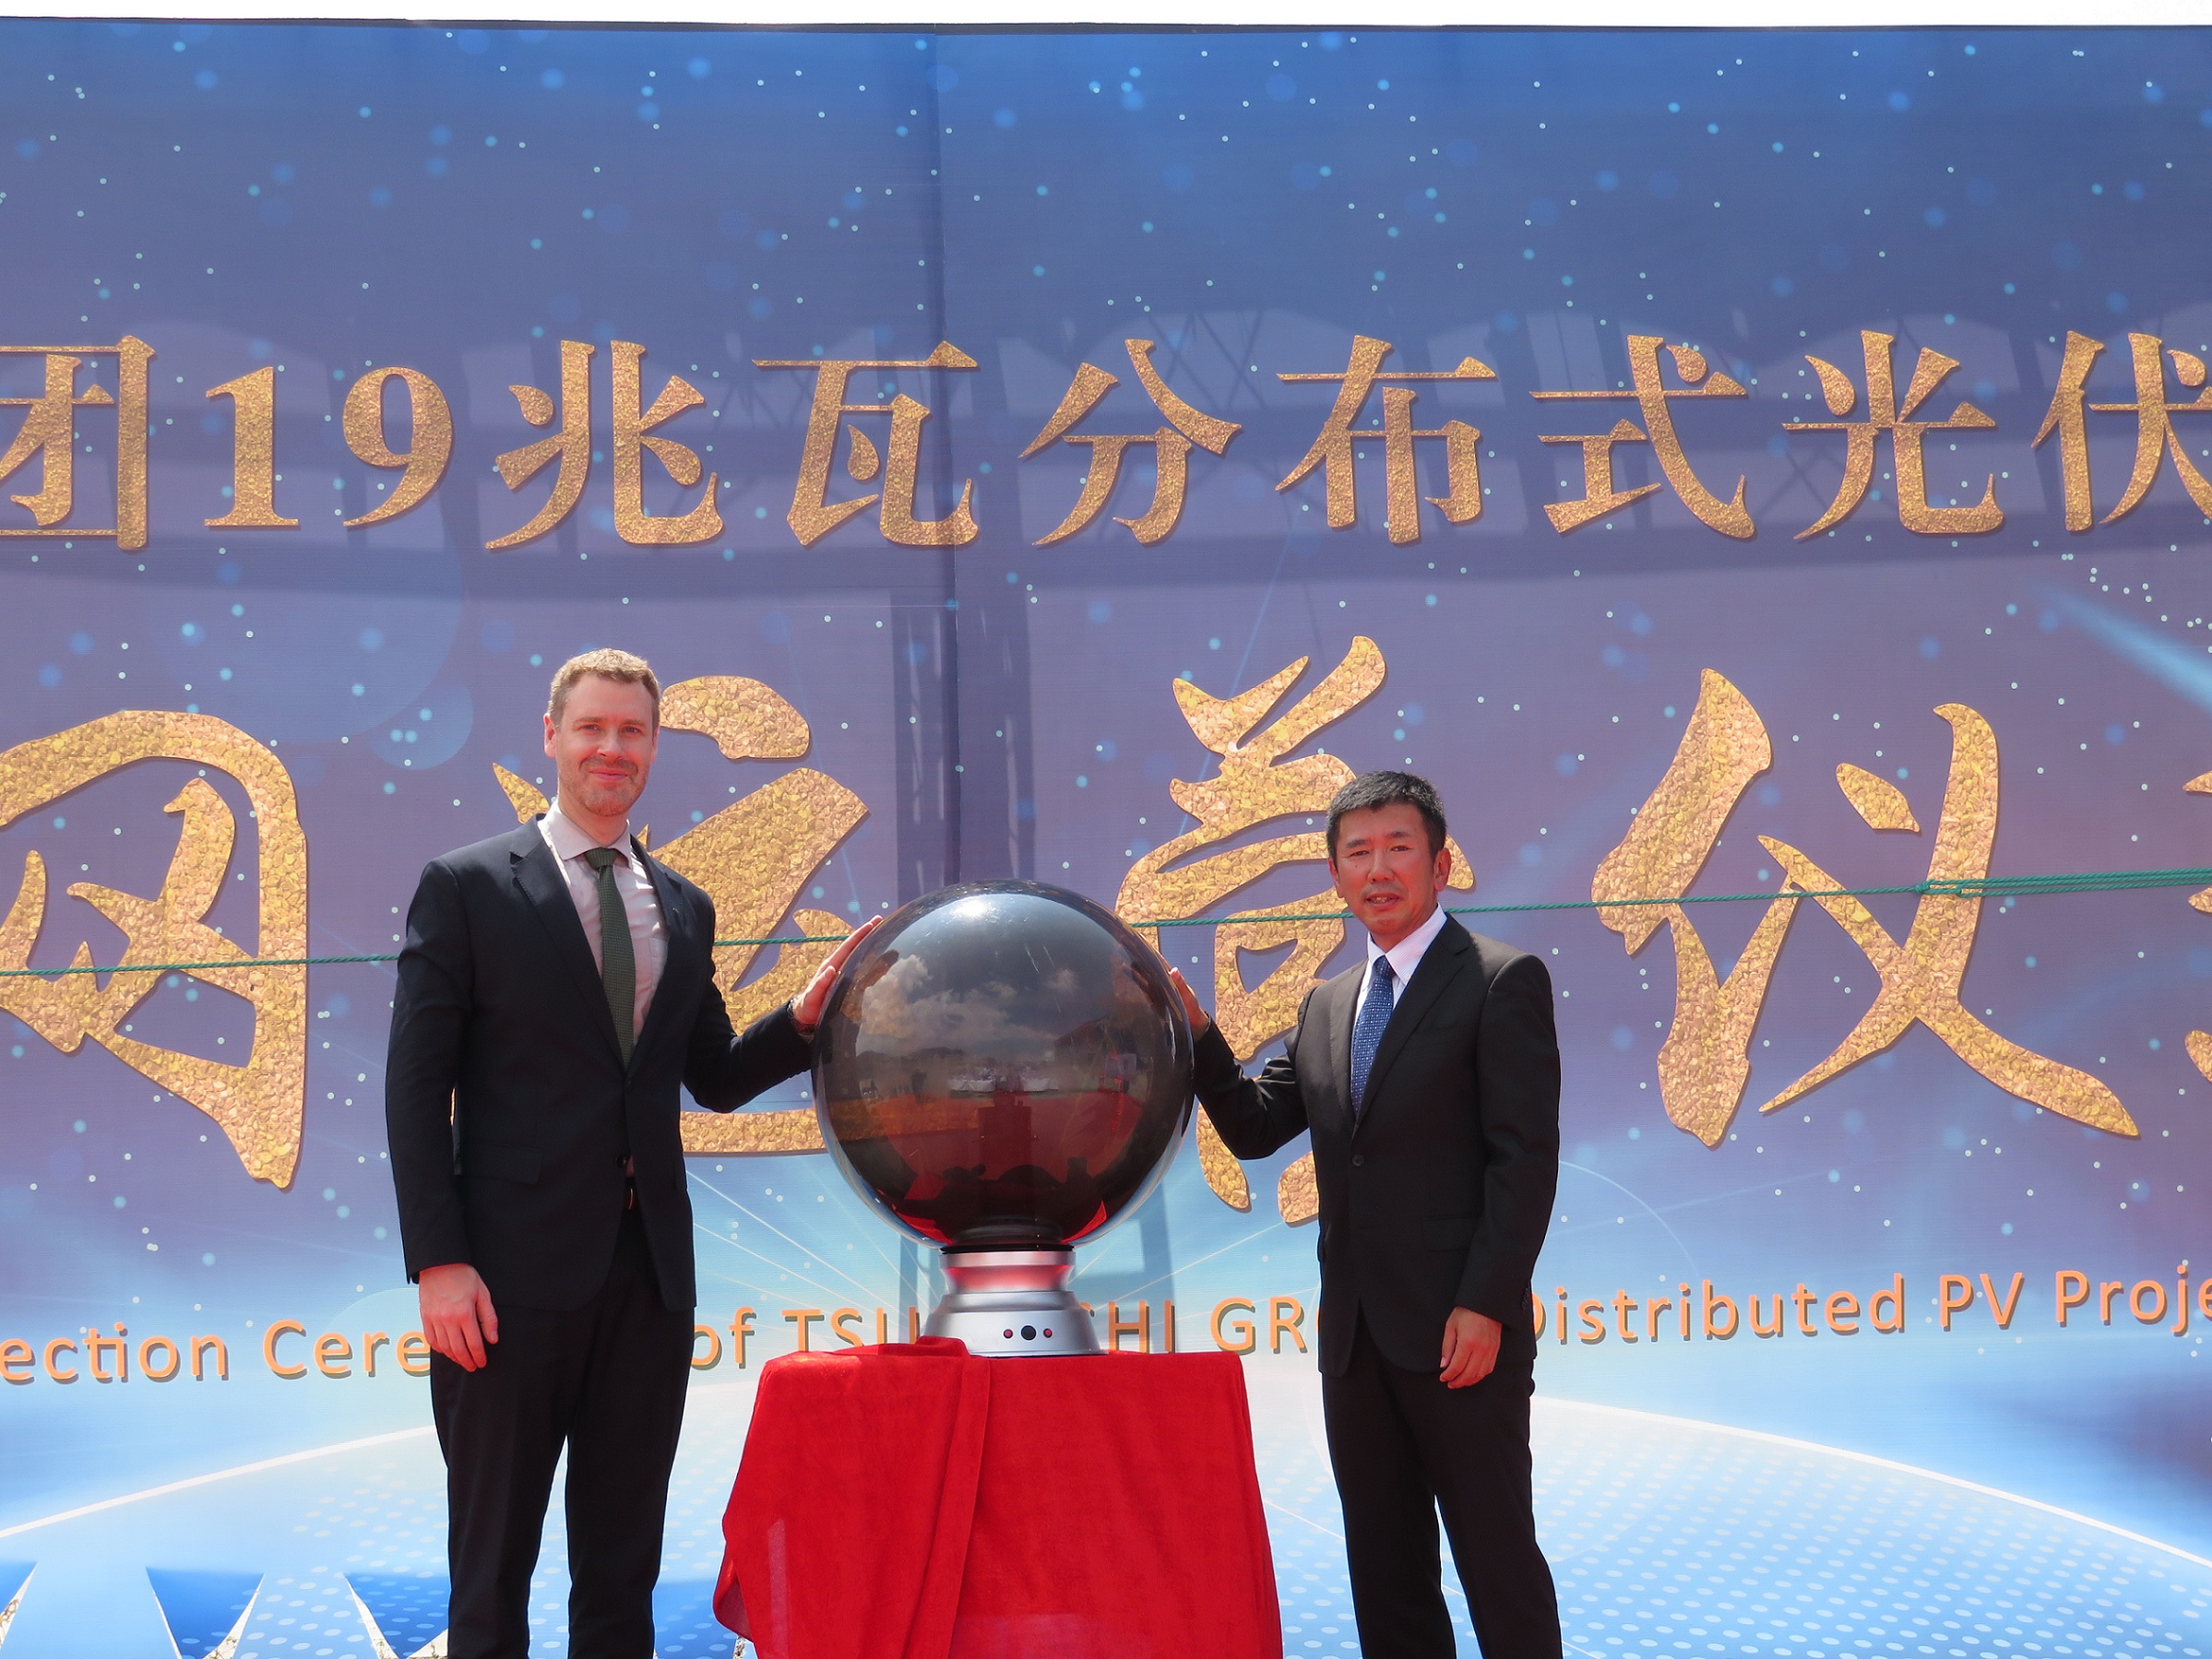 Mr. Okumura, TZS President, and Mr. Thomas Lapham, ACC CEO attended the ceremony of completion